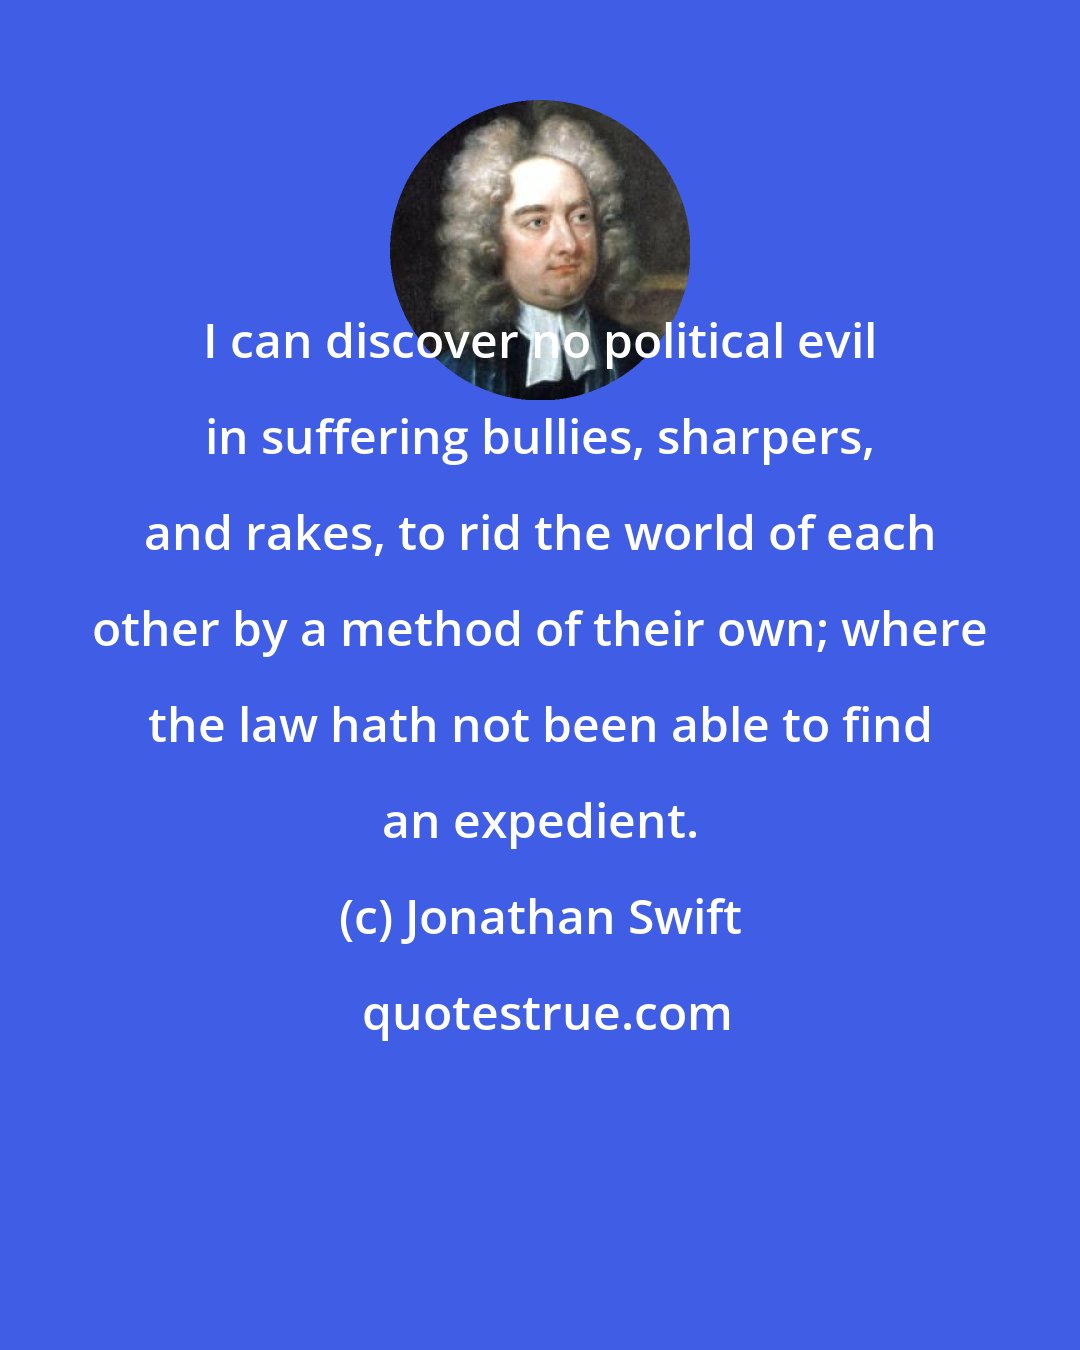 Jonathan Swift: I can discover no political evil in suffering bullies, sharpers, and rakes, to rid the world of each other by a method of their own; where the law hath not been able to find an expedient.